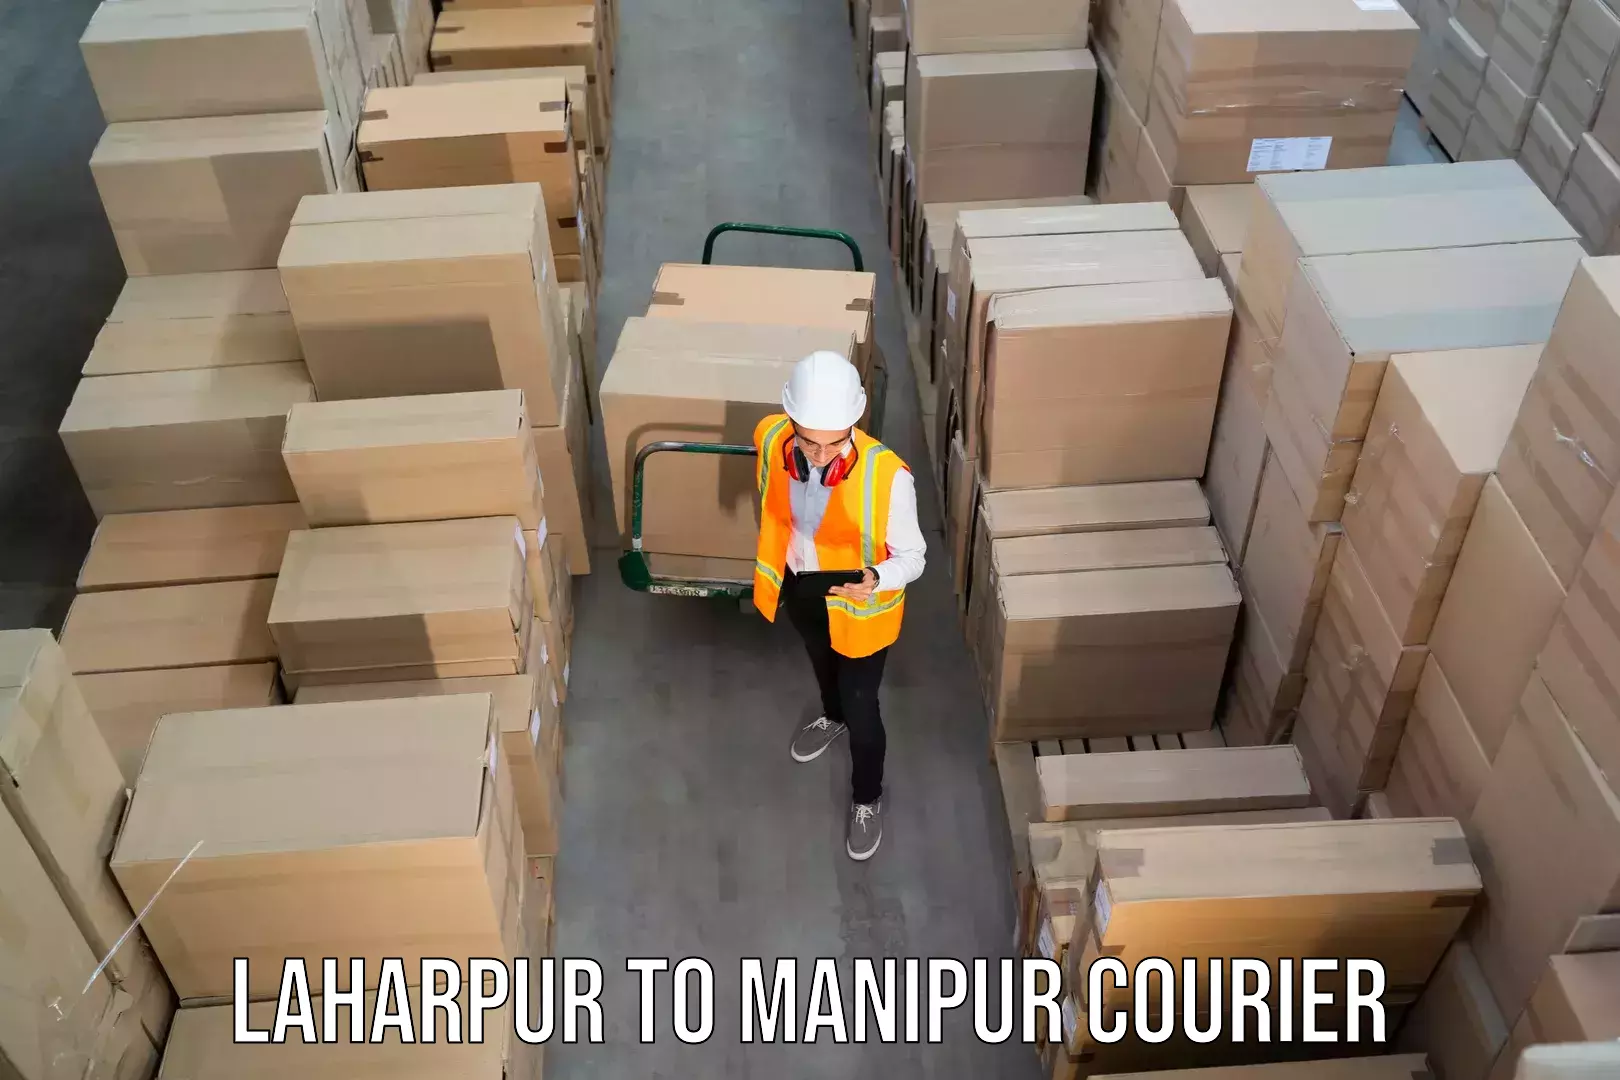 Same-day delivery solutions Laharpur to Imphal